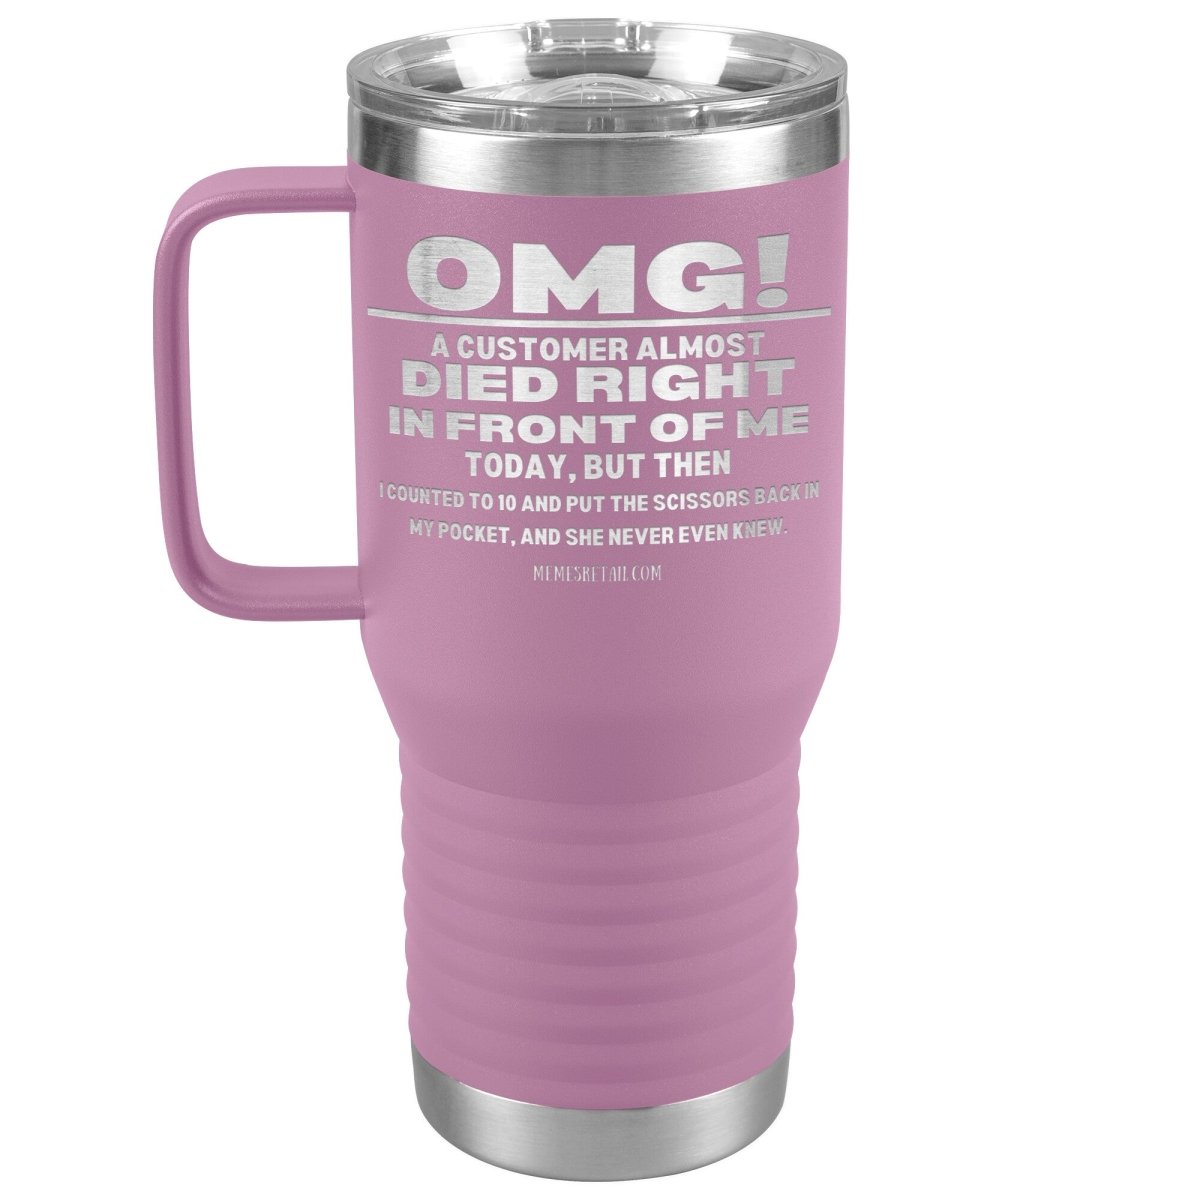 OMG! A Customer Almost Died Right In Front Of Me Tumbler, 20oz Travel Tumbler / Light Purple - MemesRetail.com